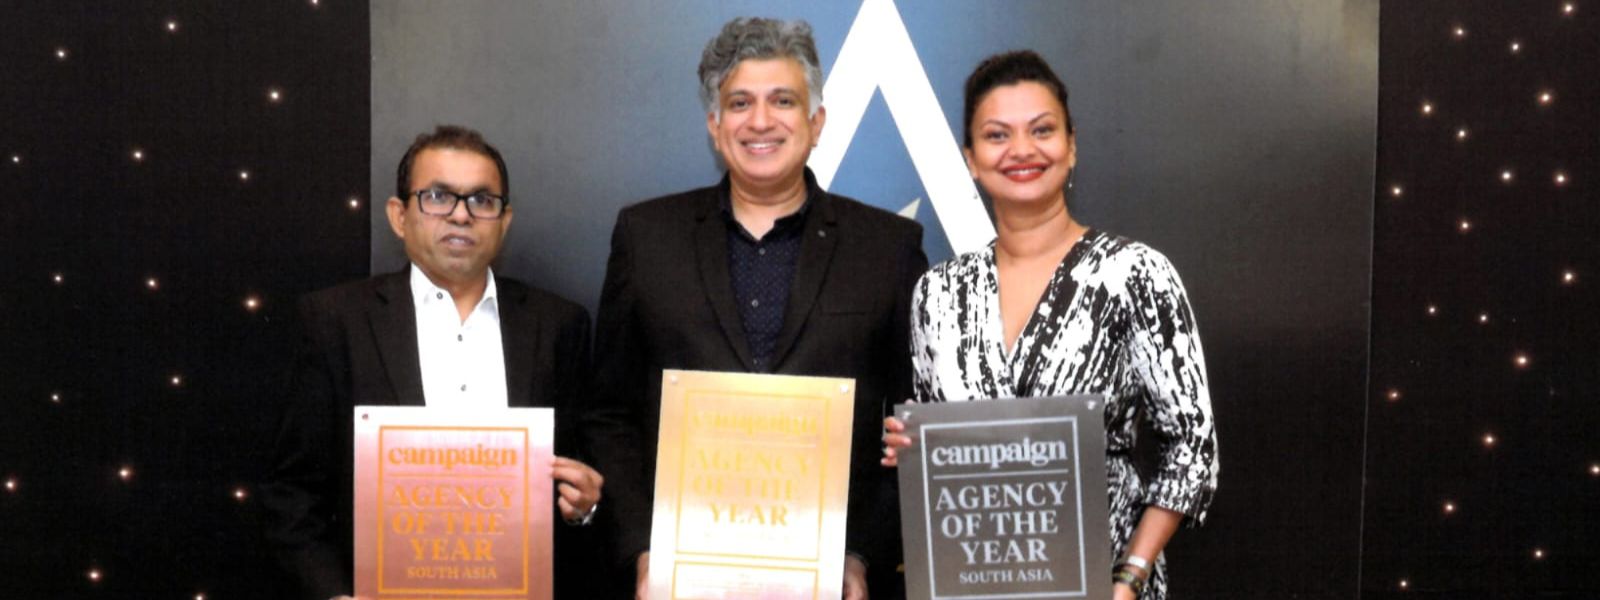 Triple Victory for Ogilvy Group at Campaign Asia